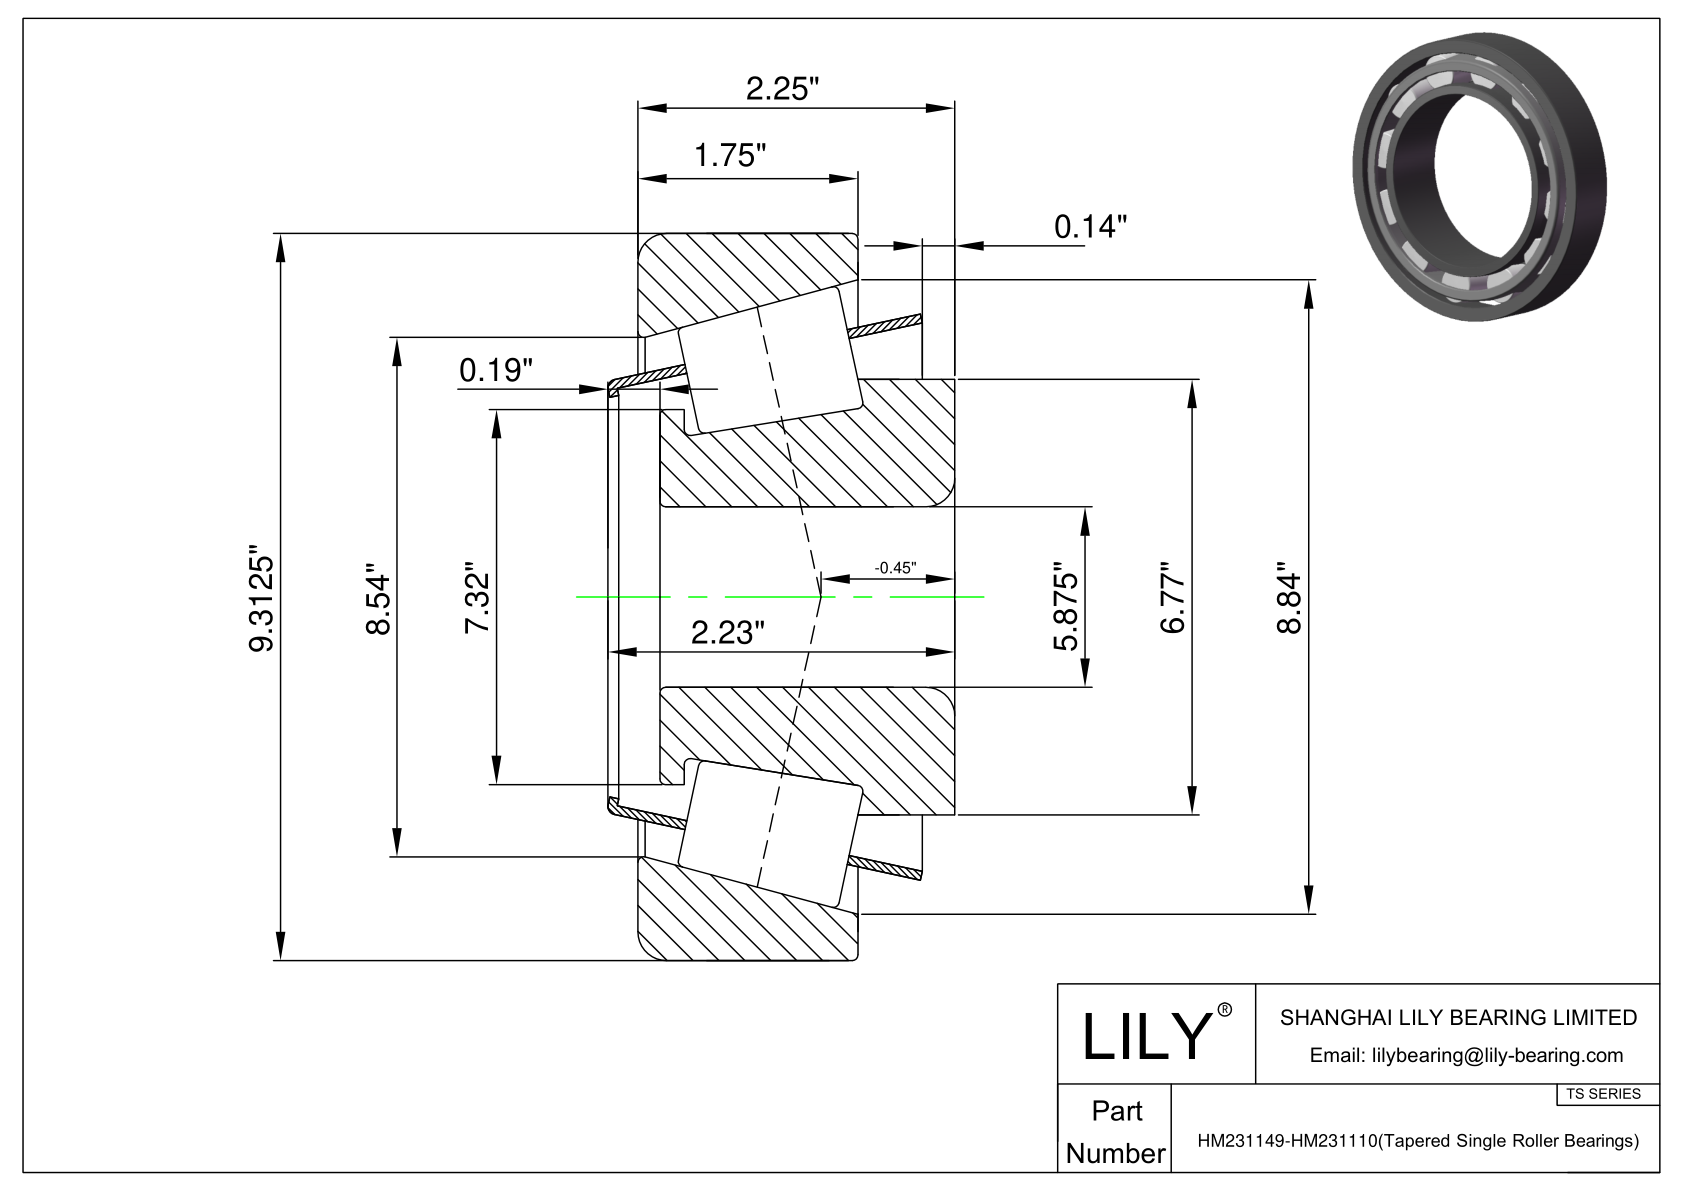 HM231149-HM231110 TS (Tapered Single Roller Bearings) (Imperial) cad drawing